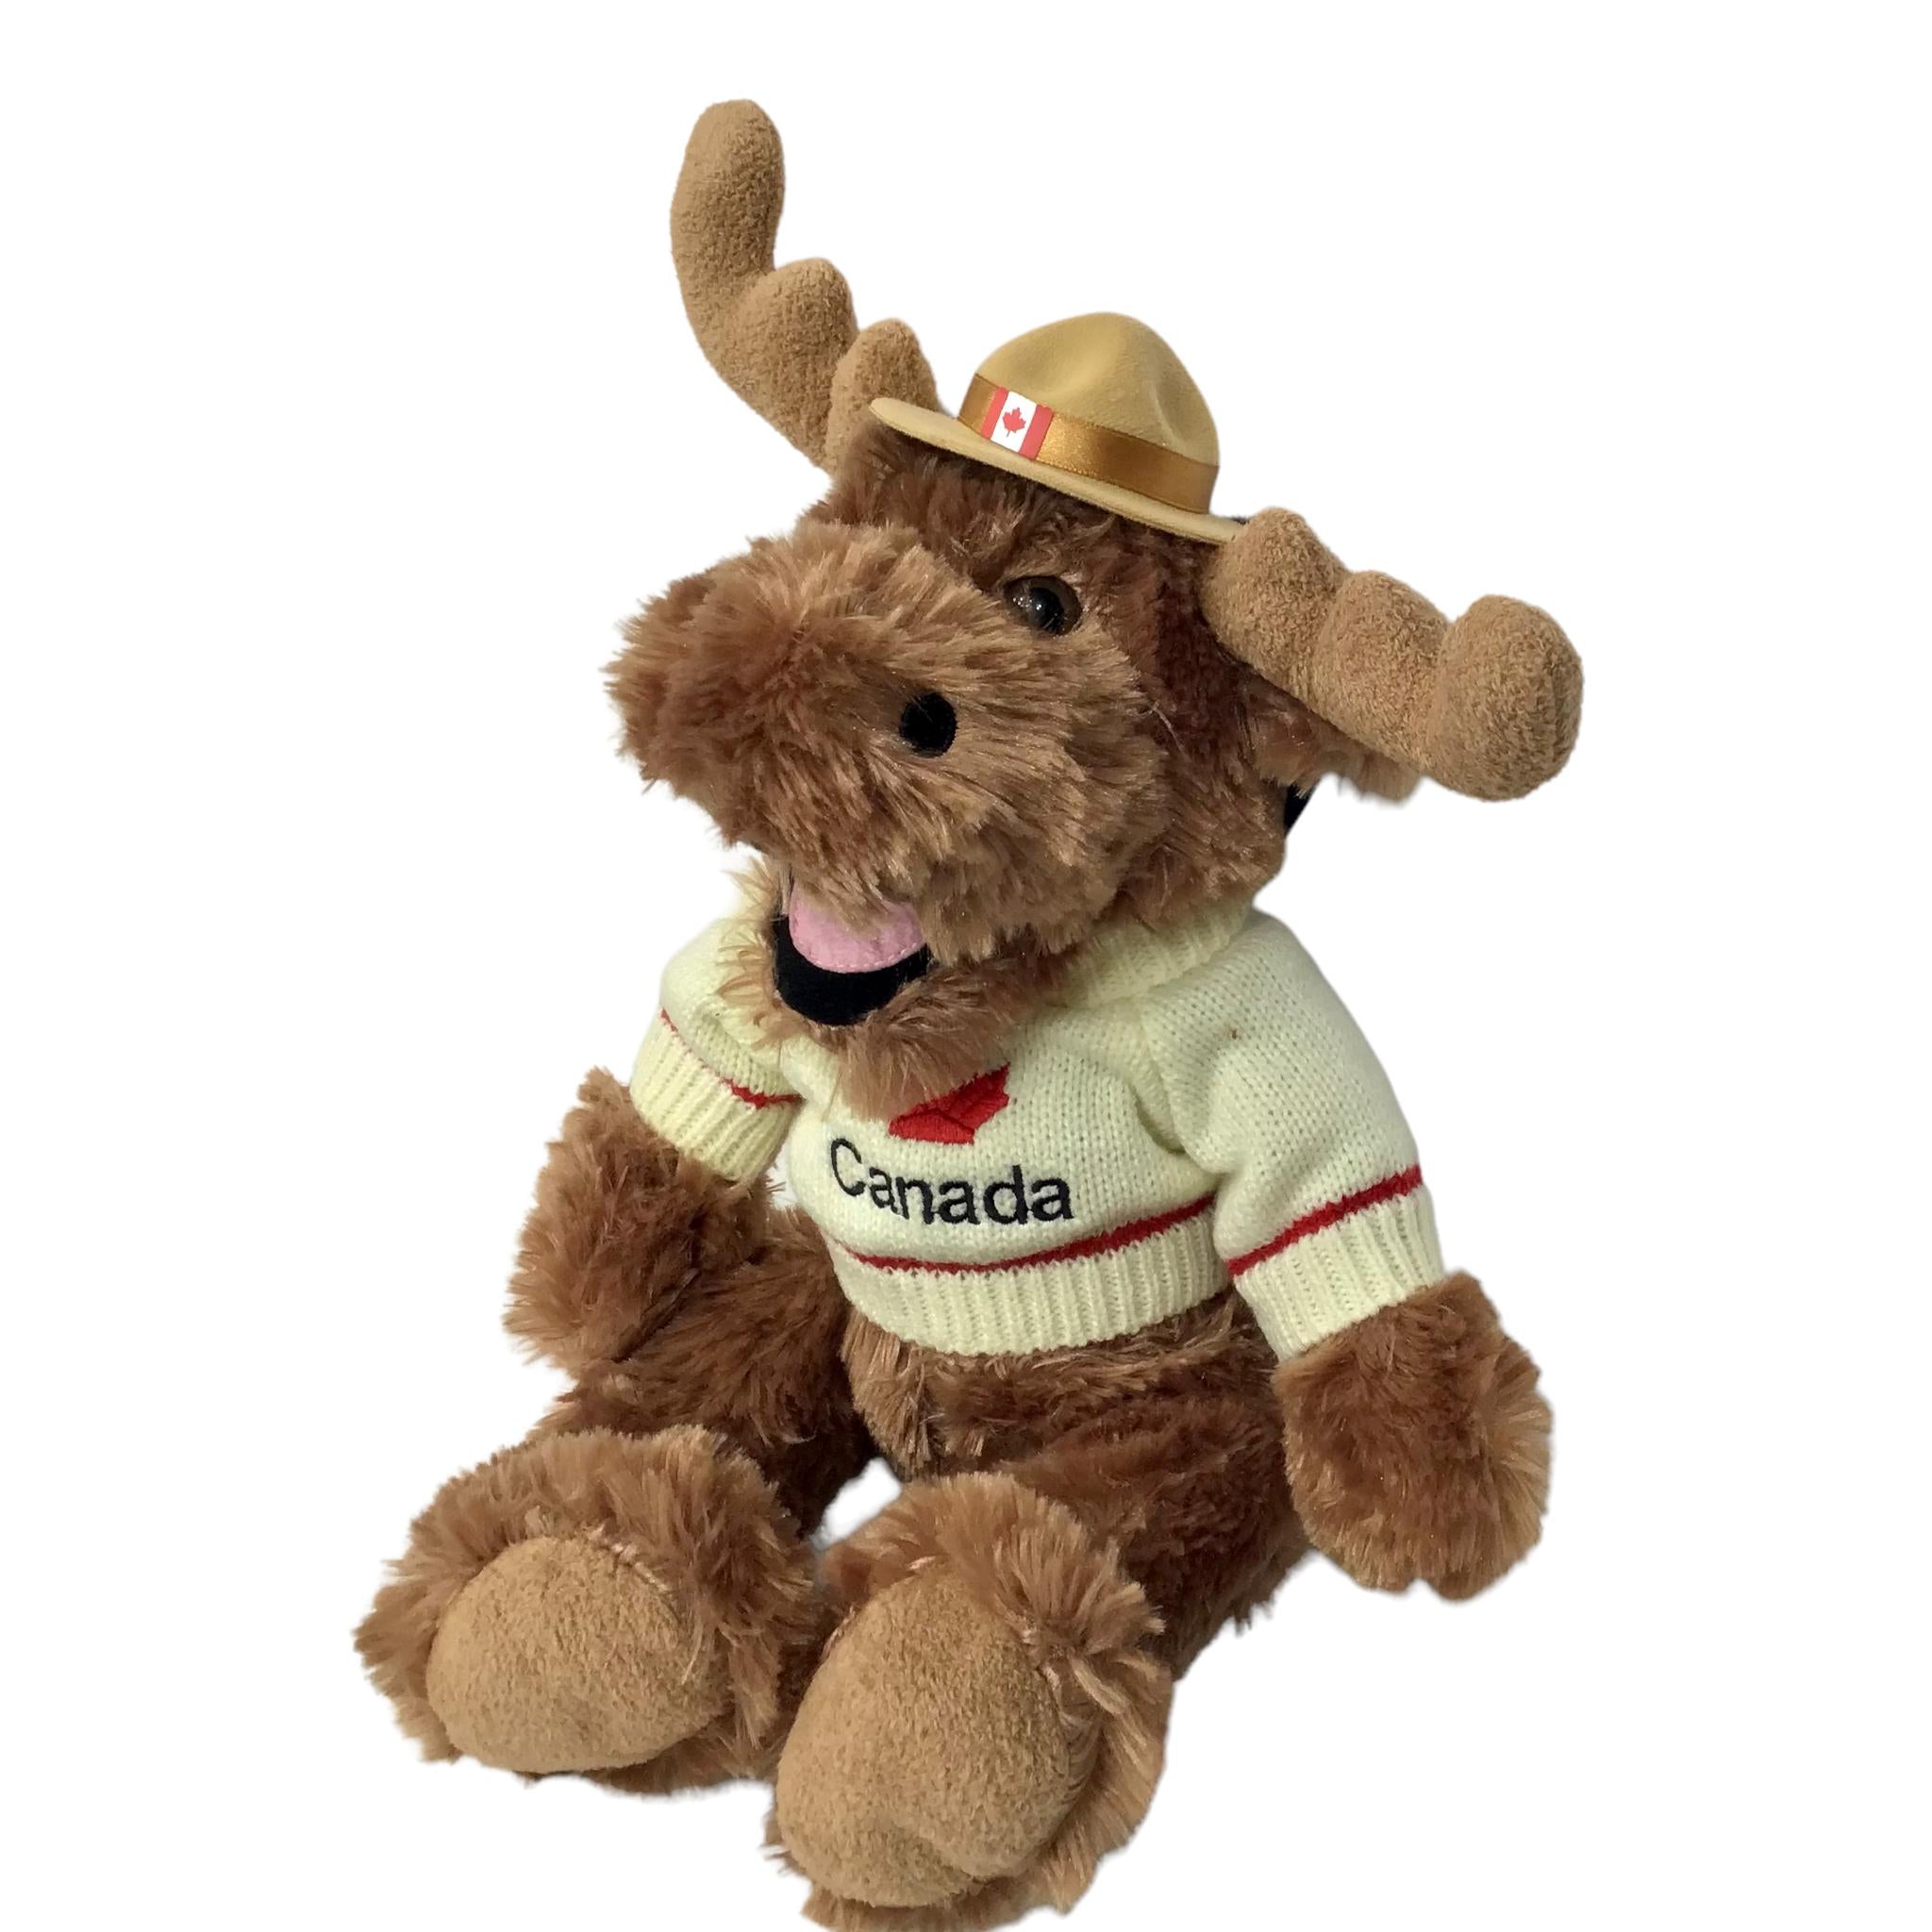 Happy laughing moose with off white Canada maple leaf embroidery 14” Stuffed Animal Plush Toy